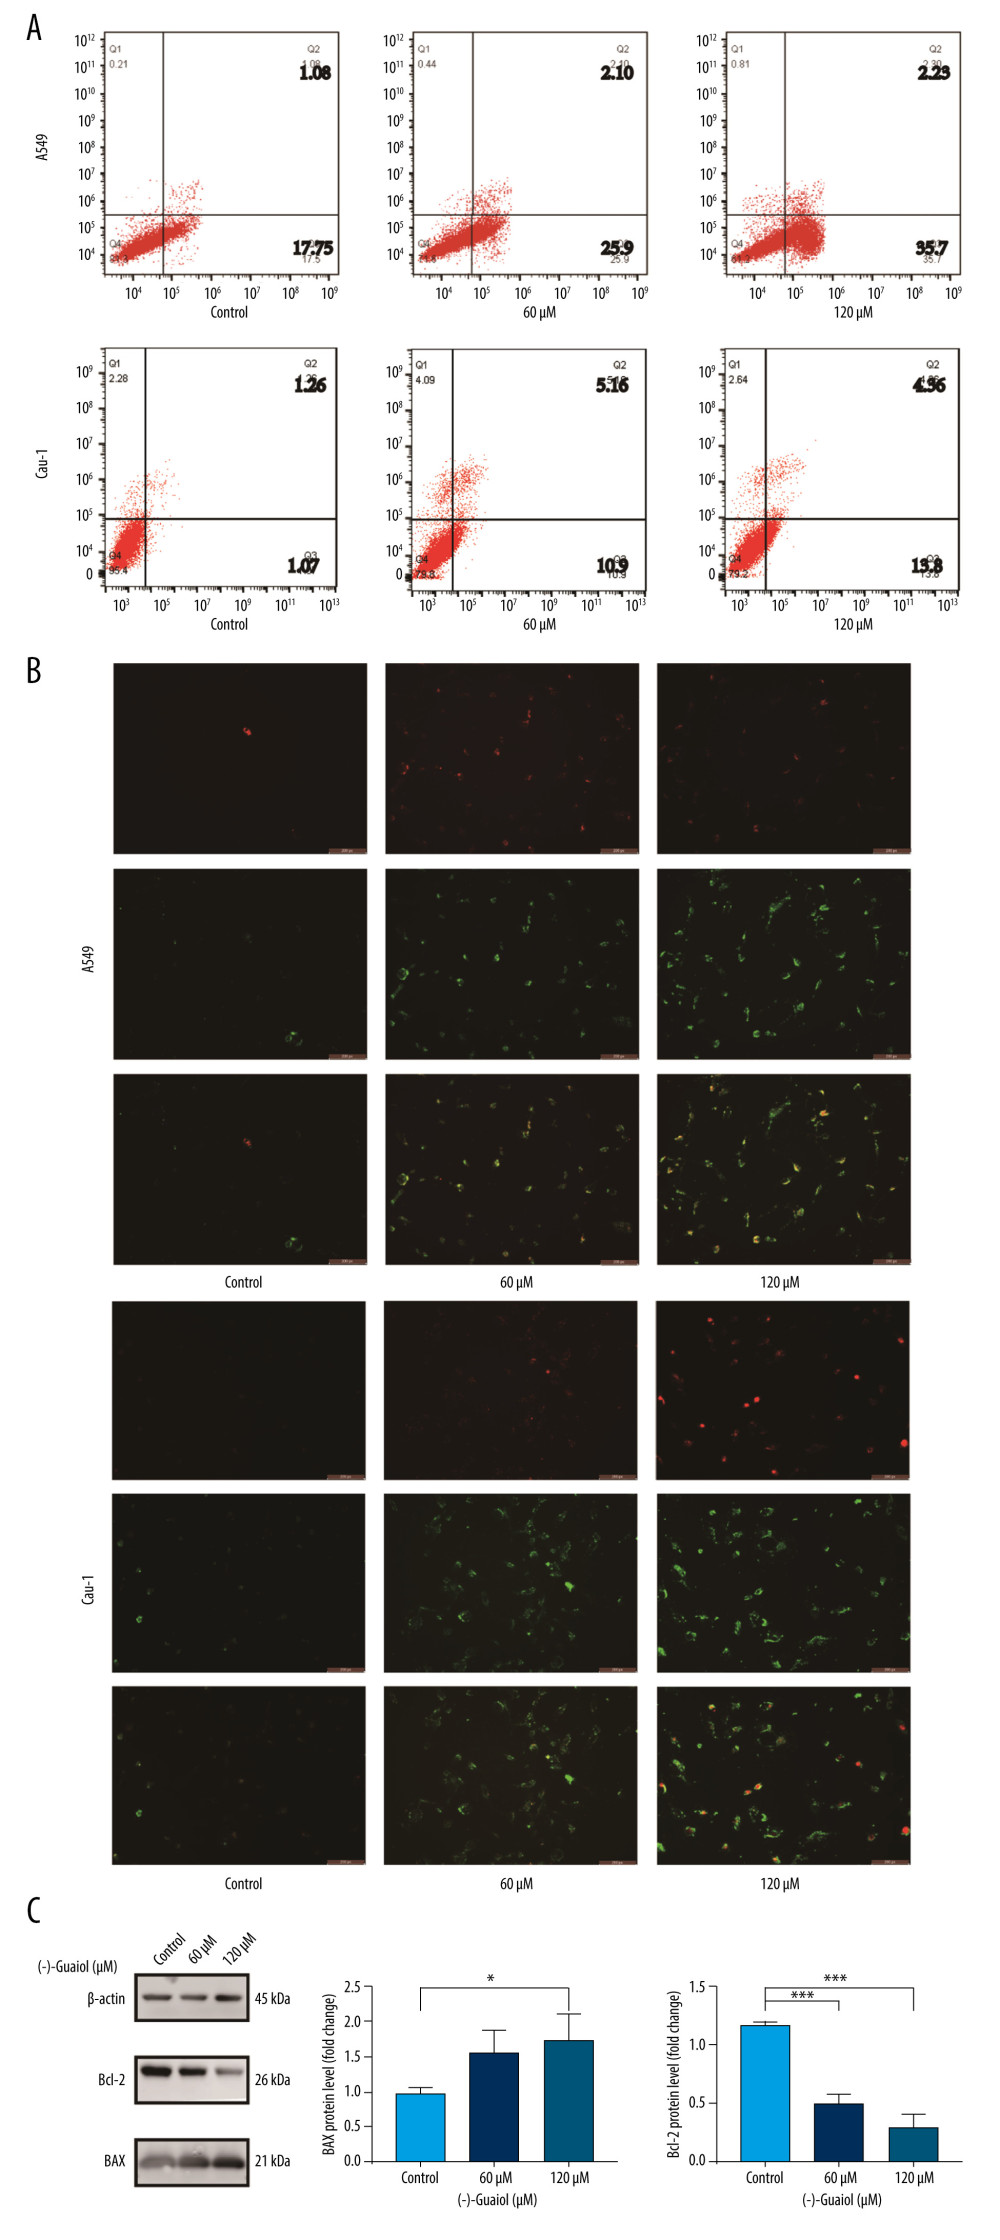 (A) Flow cytometry to detect the apoptosis rate in A549 and Calu-1 treated with different concentrations of (−)-Guaiol. (B) Fluorescence microscope was used to observe apoptosis in A549 and Calu-1 treated with different concentrations of (−)-Guaiol. (C) Western blot analysis was used to detect the protein expression of BAX and Bcl-2 in A549 treated with (−)-Guaiol (60 μM or 120 μM). The relative BAX and Bcl-2 levels from 3 independent experiments were statistically analyzed using ANOV A test in the quantitative analysis. * P<0.05, *** P<0.001 vs control.